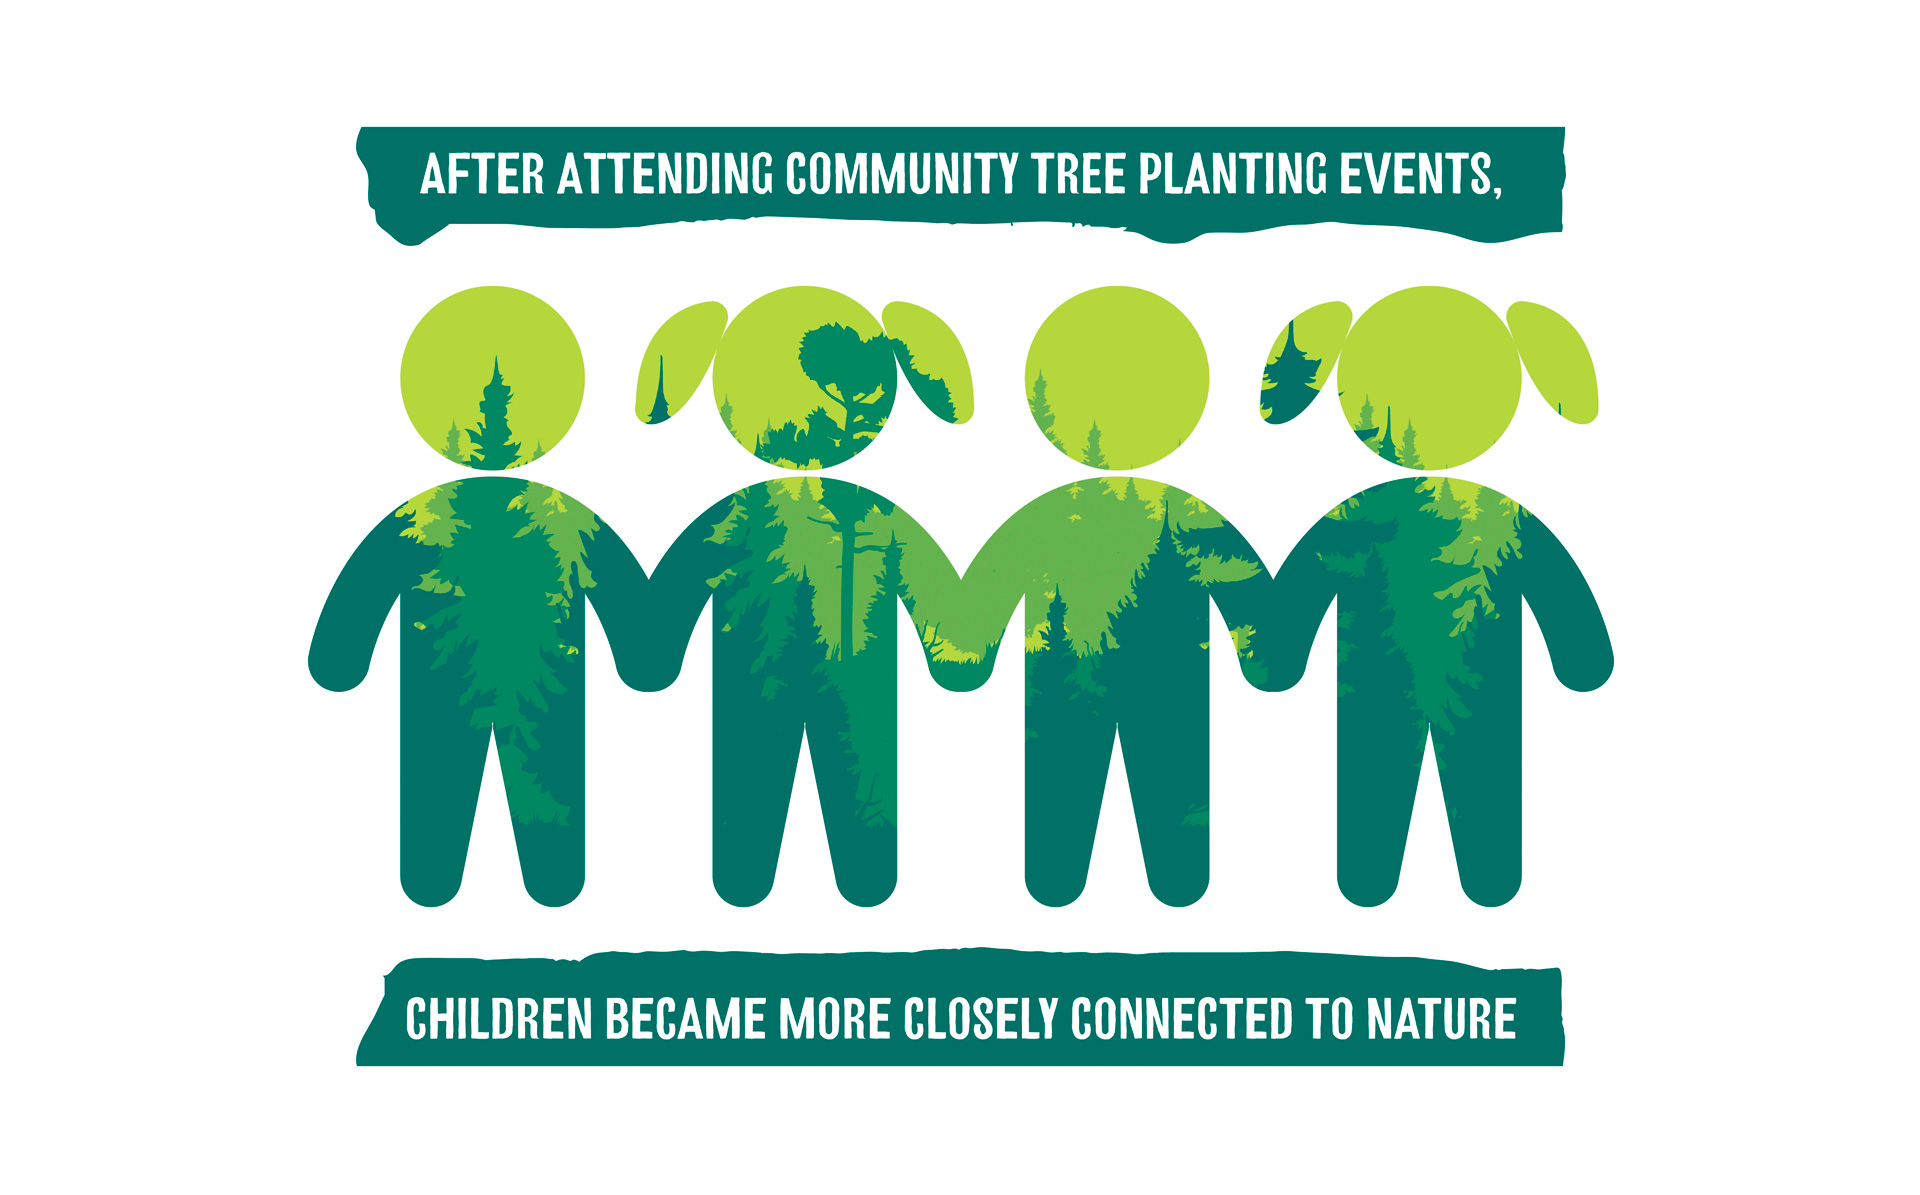 A sample of 107-154 children. On average 44% of children felt highly connected to nature before an event, rising to 60% of children feeling highly connected to nature after the event, as indicated by an adapted Illustrated Inclusion of Nature in Self scale.